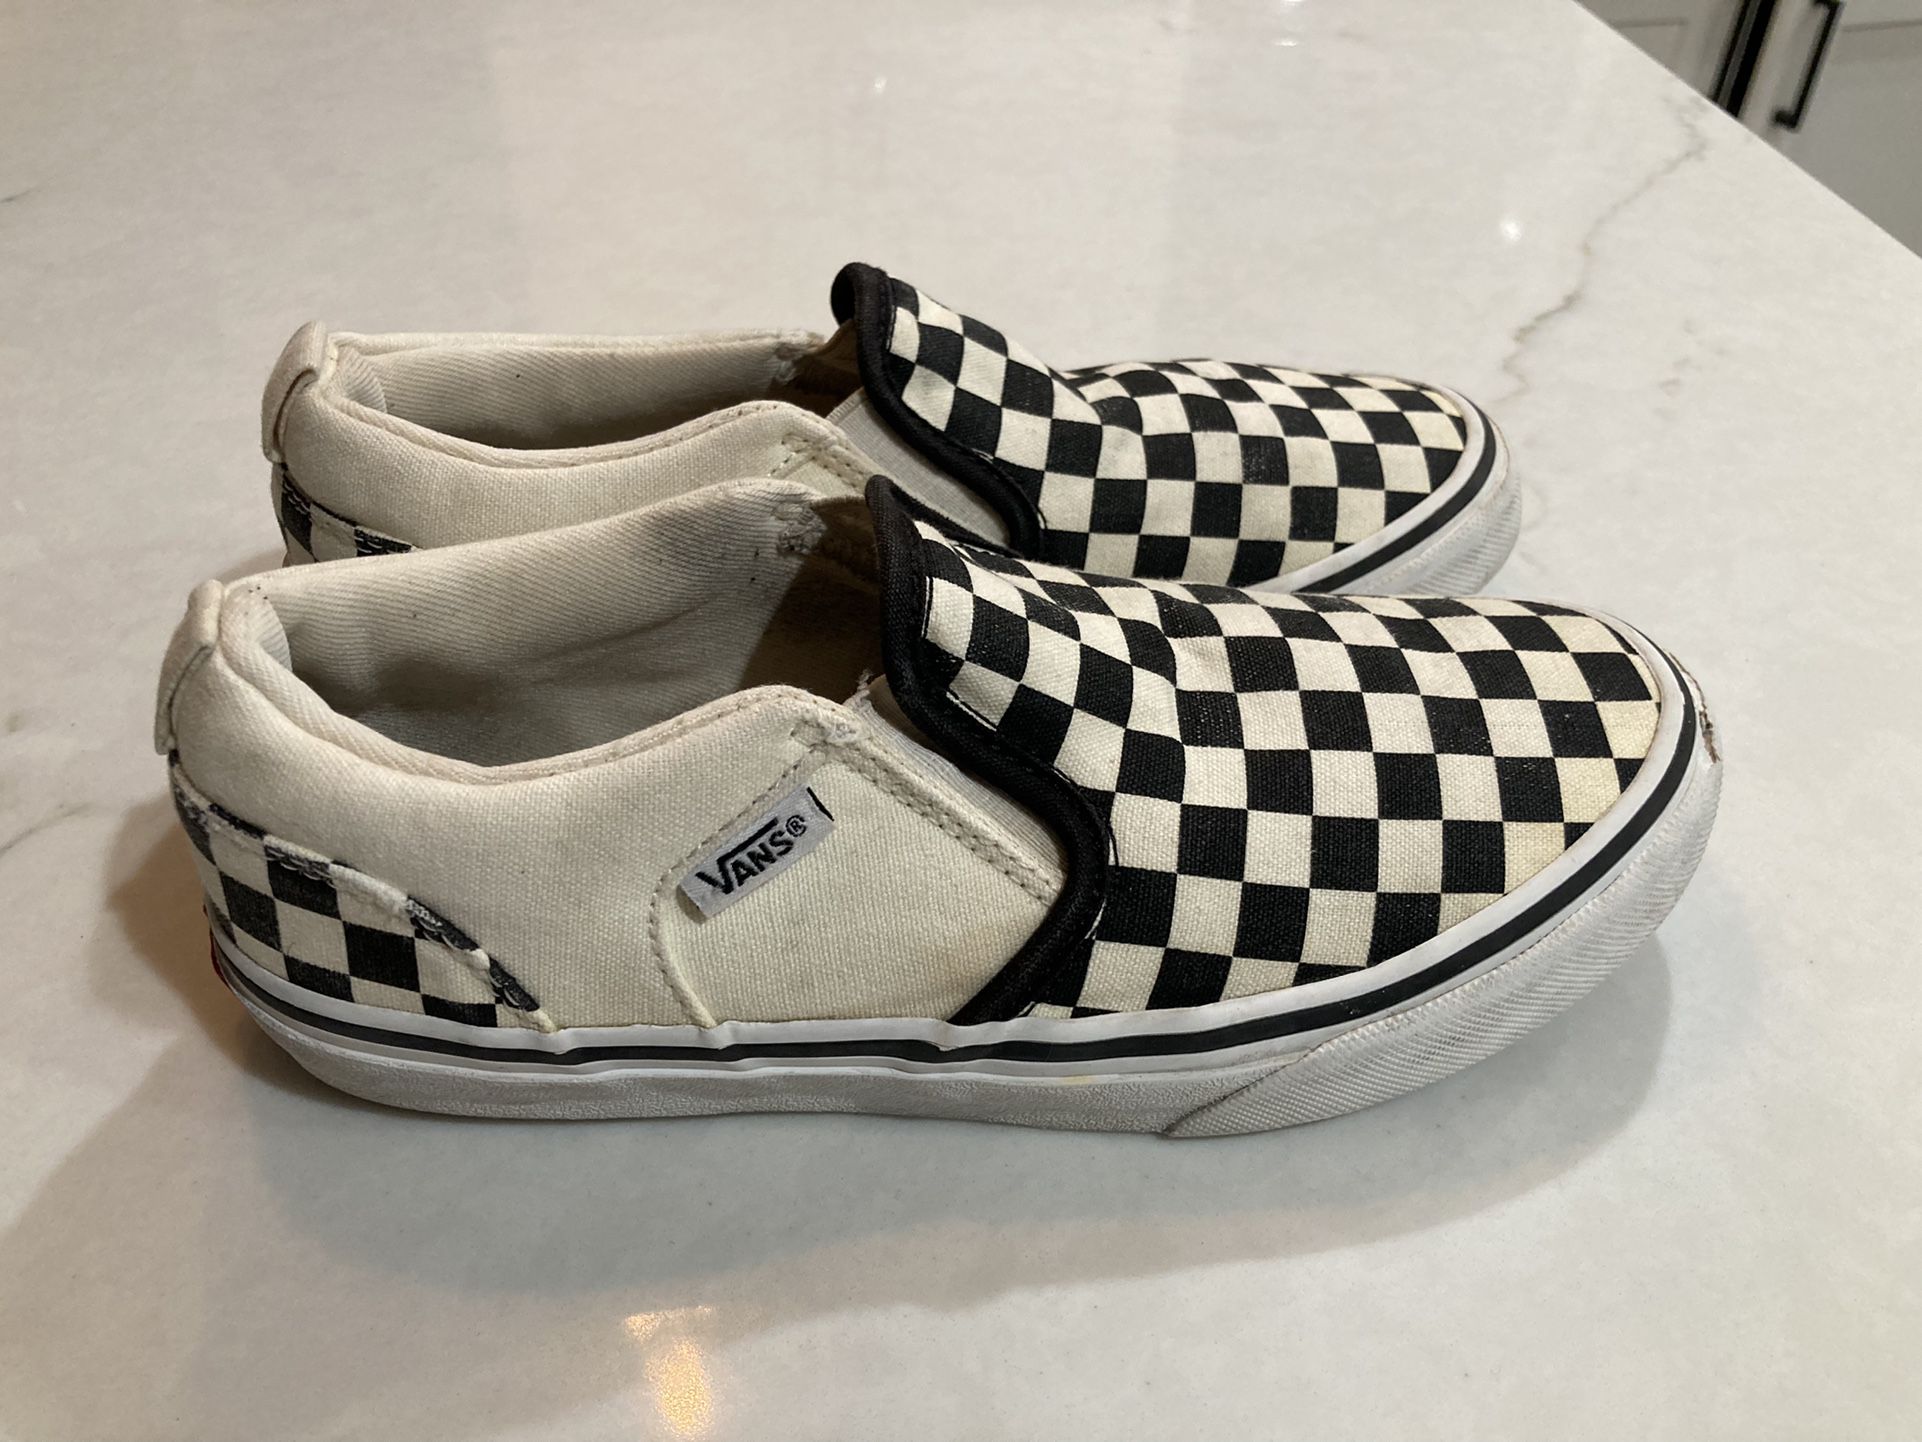 Vans Shoes Size Youth 3 for Sale in Jurupa Valley, CA - OfferUp